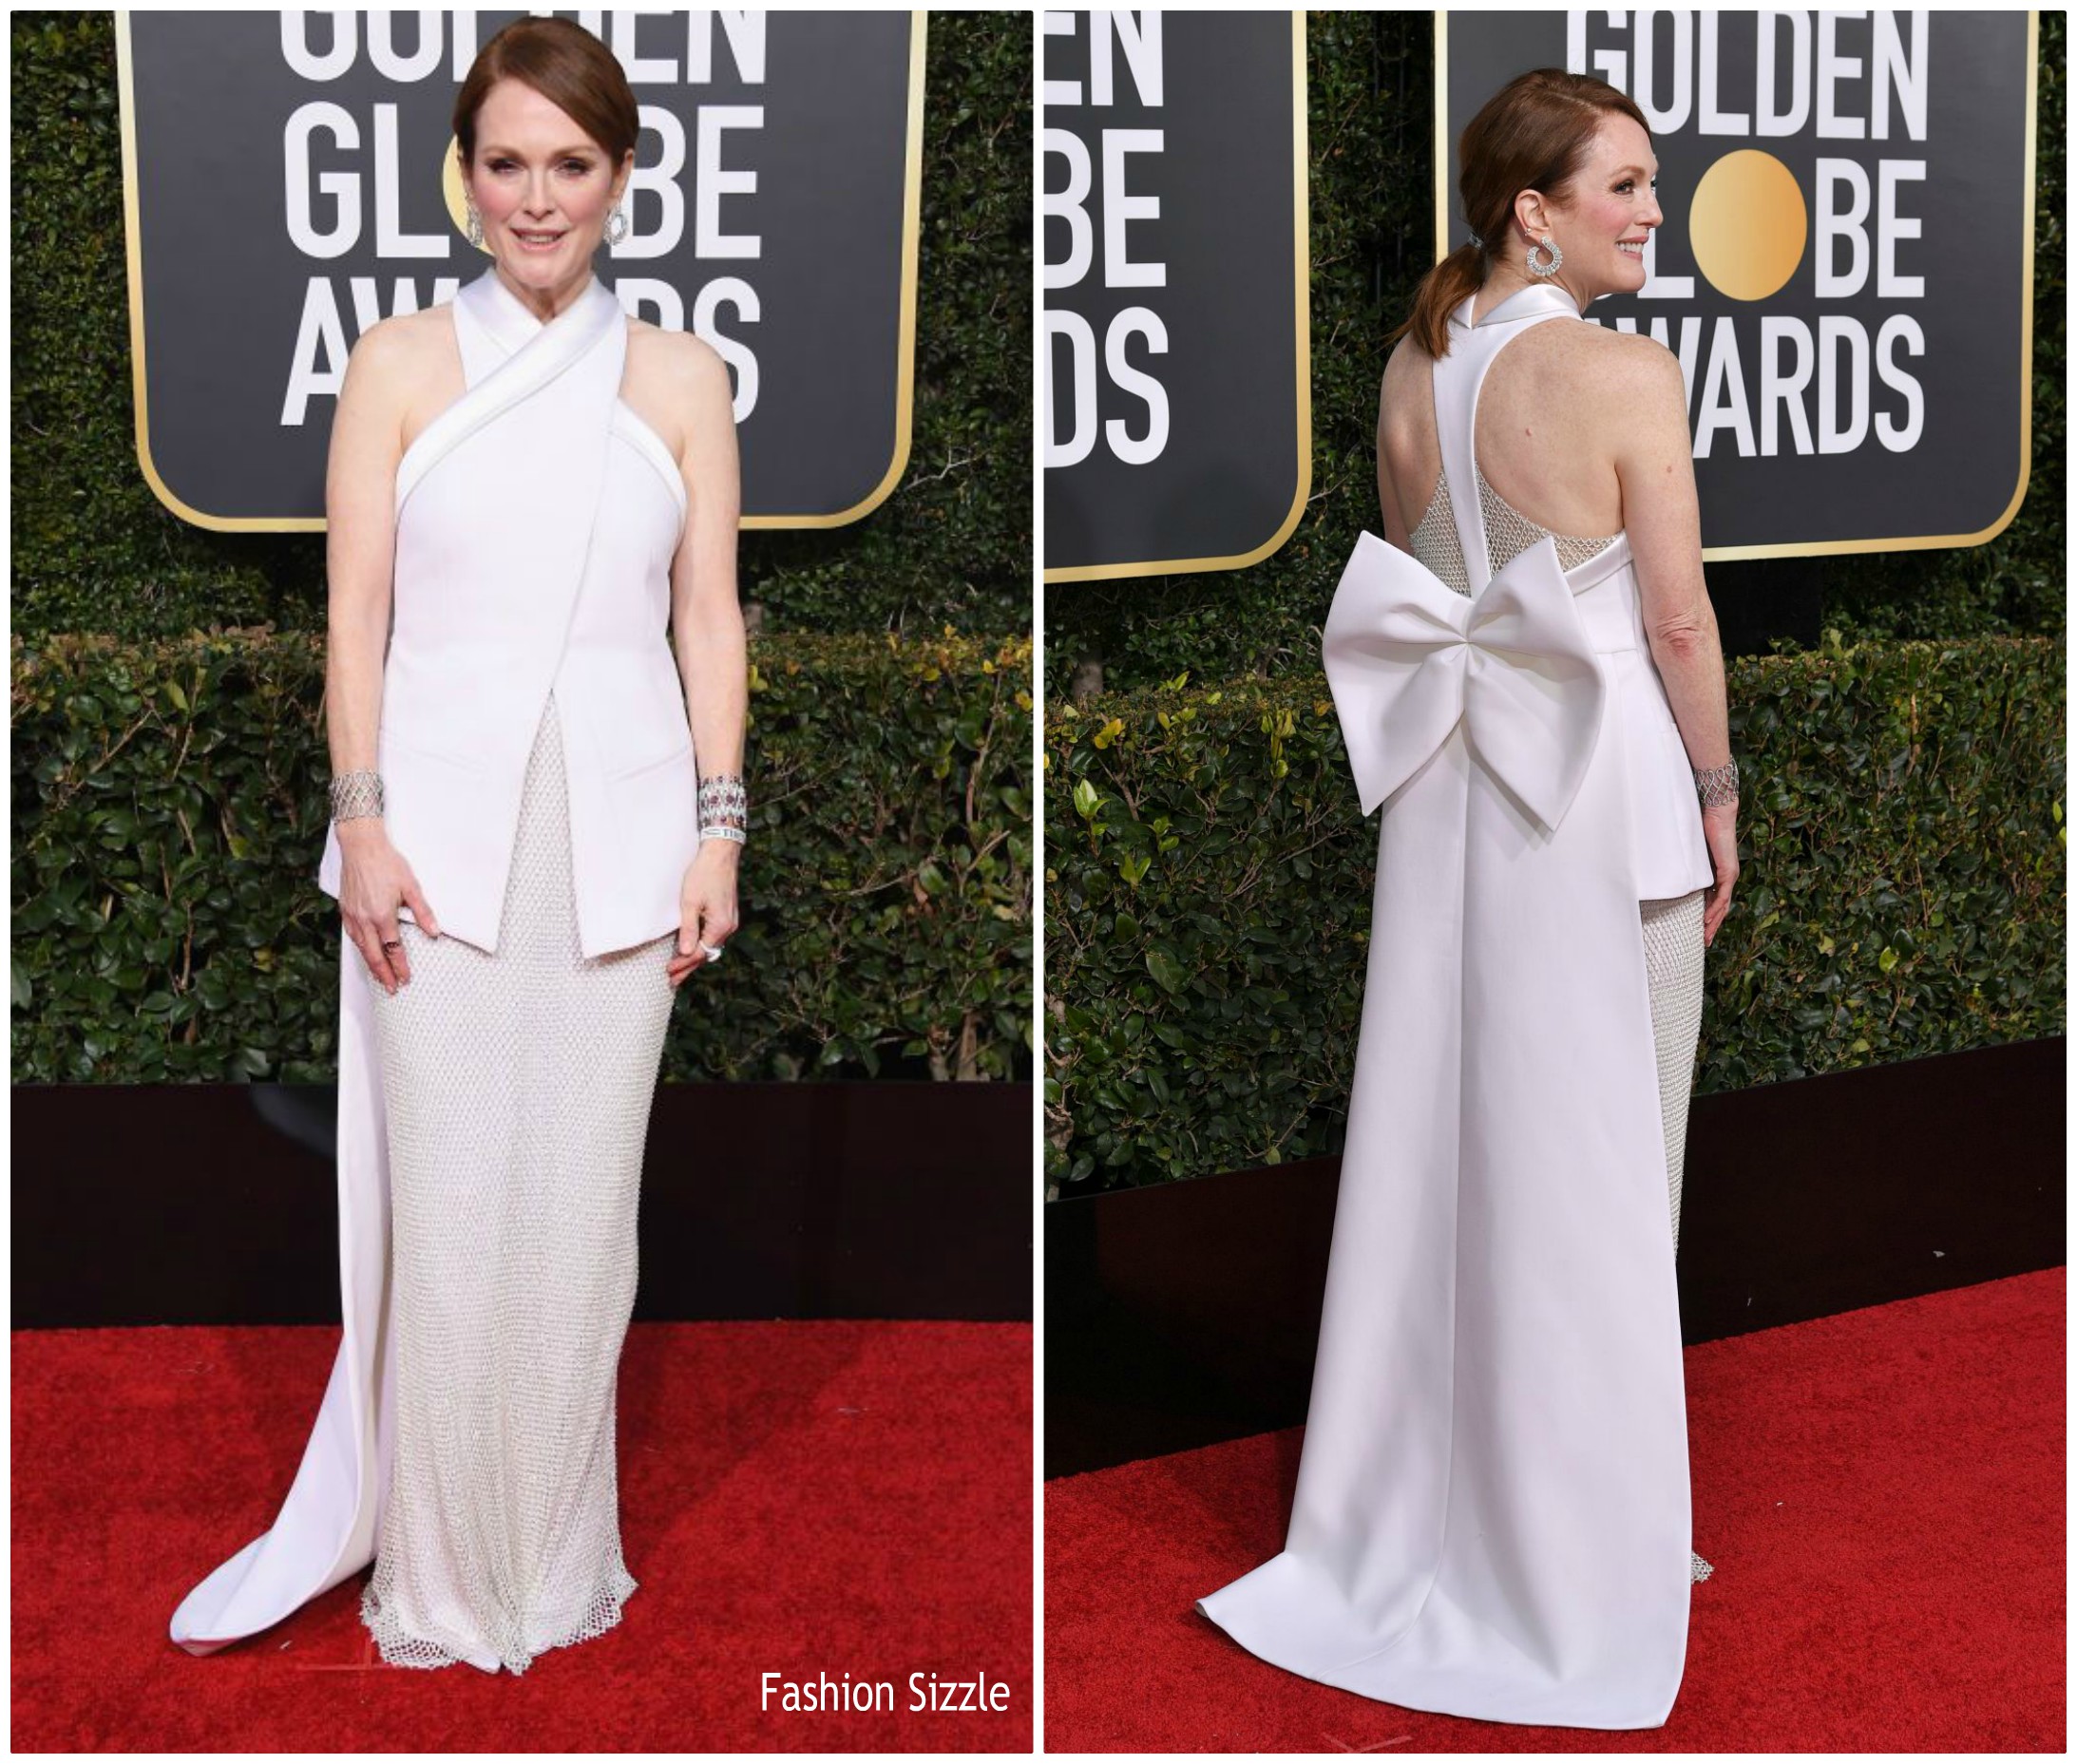 Julianne Moore In Givenchy Haute Couture @ 2019 Golden Globe Awards